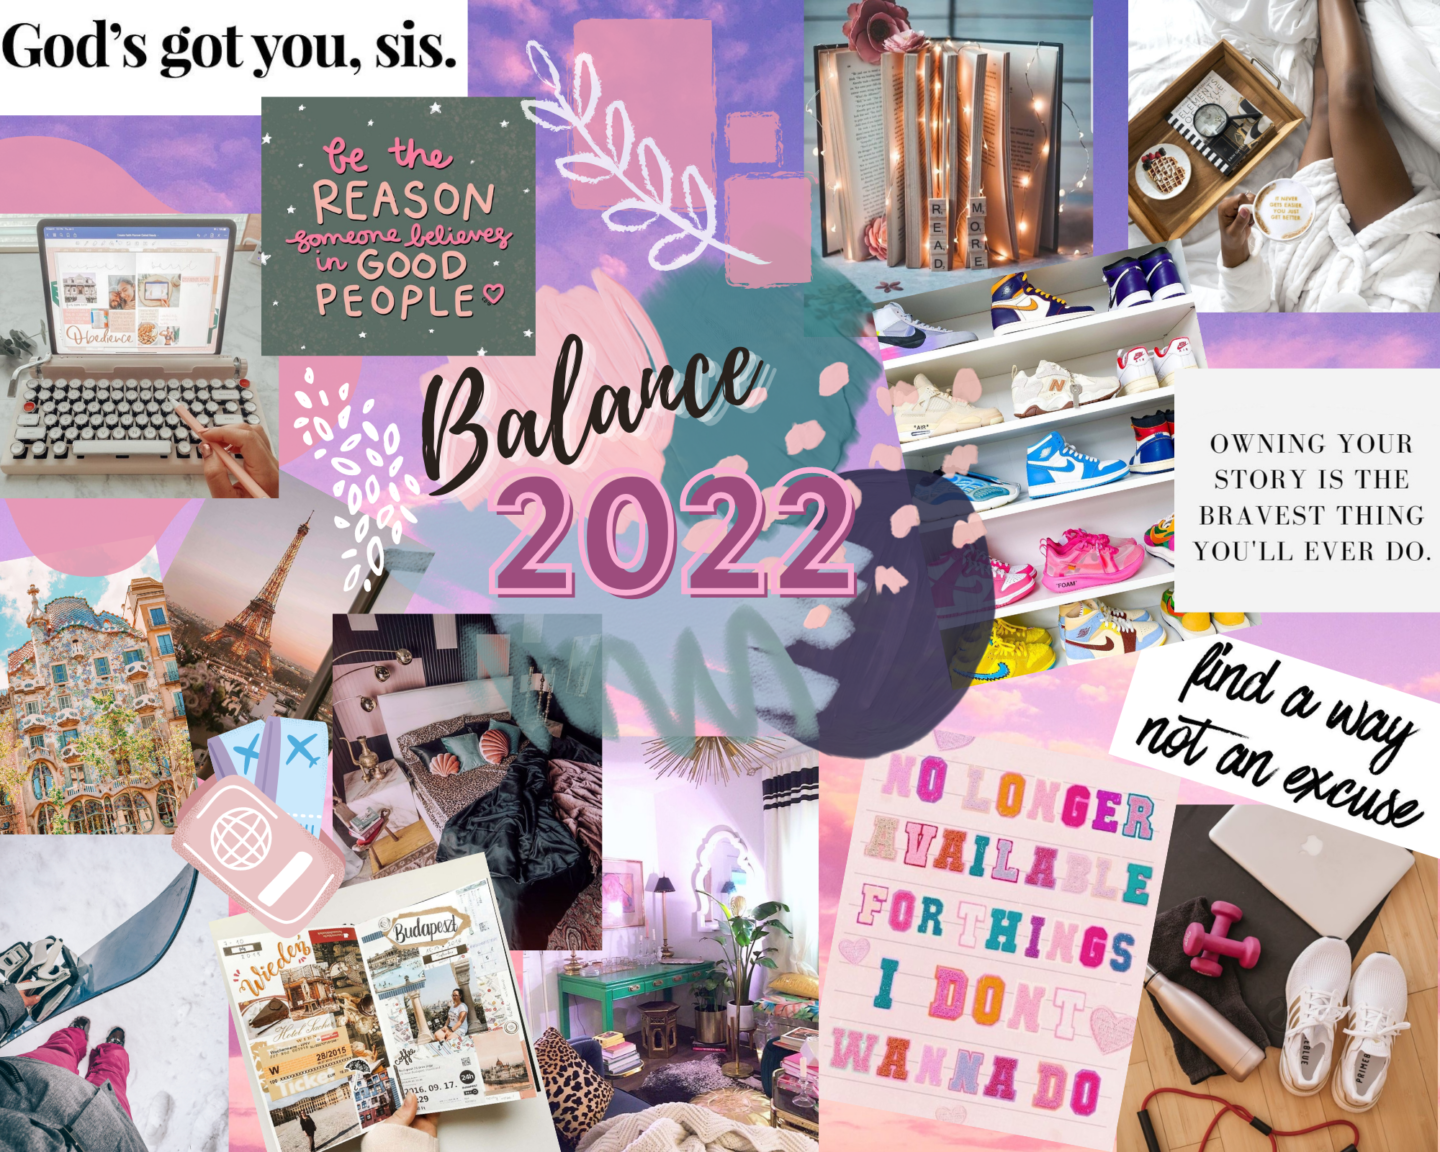 How To Create A Vision Board That Actually Inspires You - Kayla's Chaos